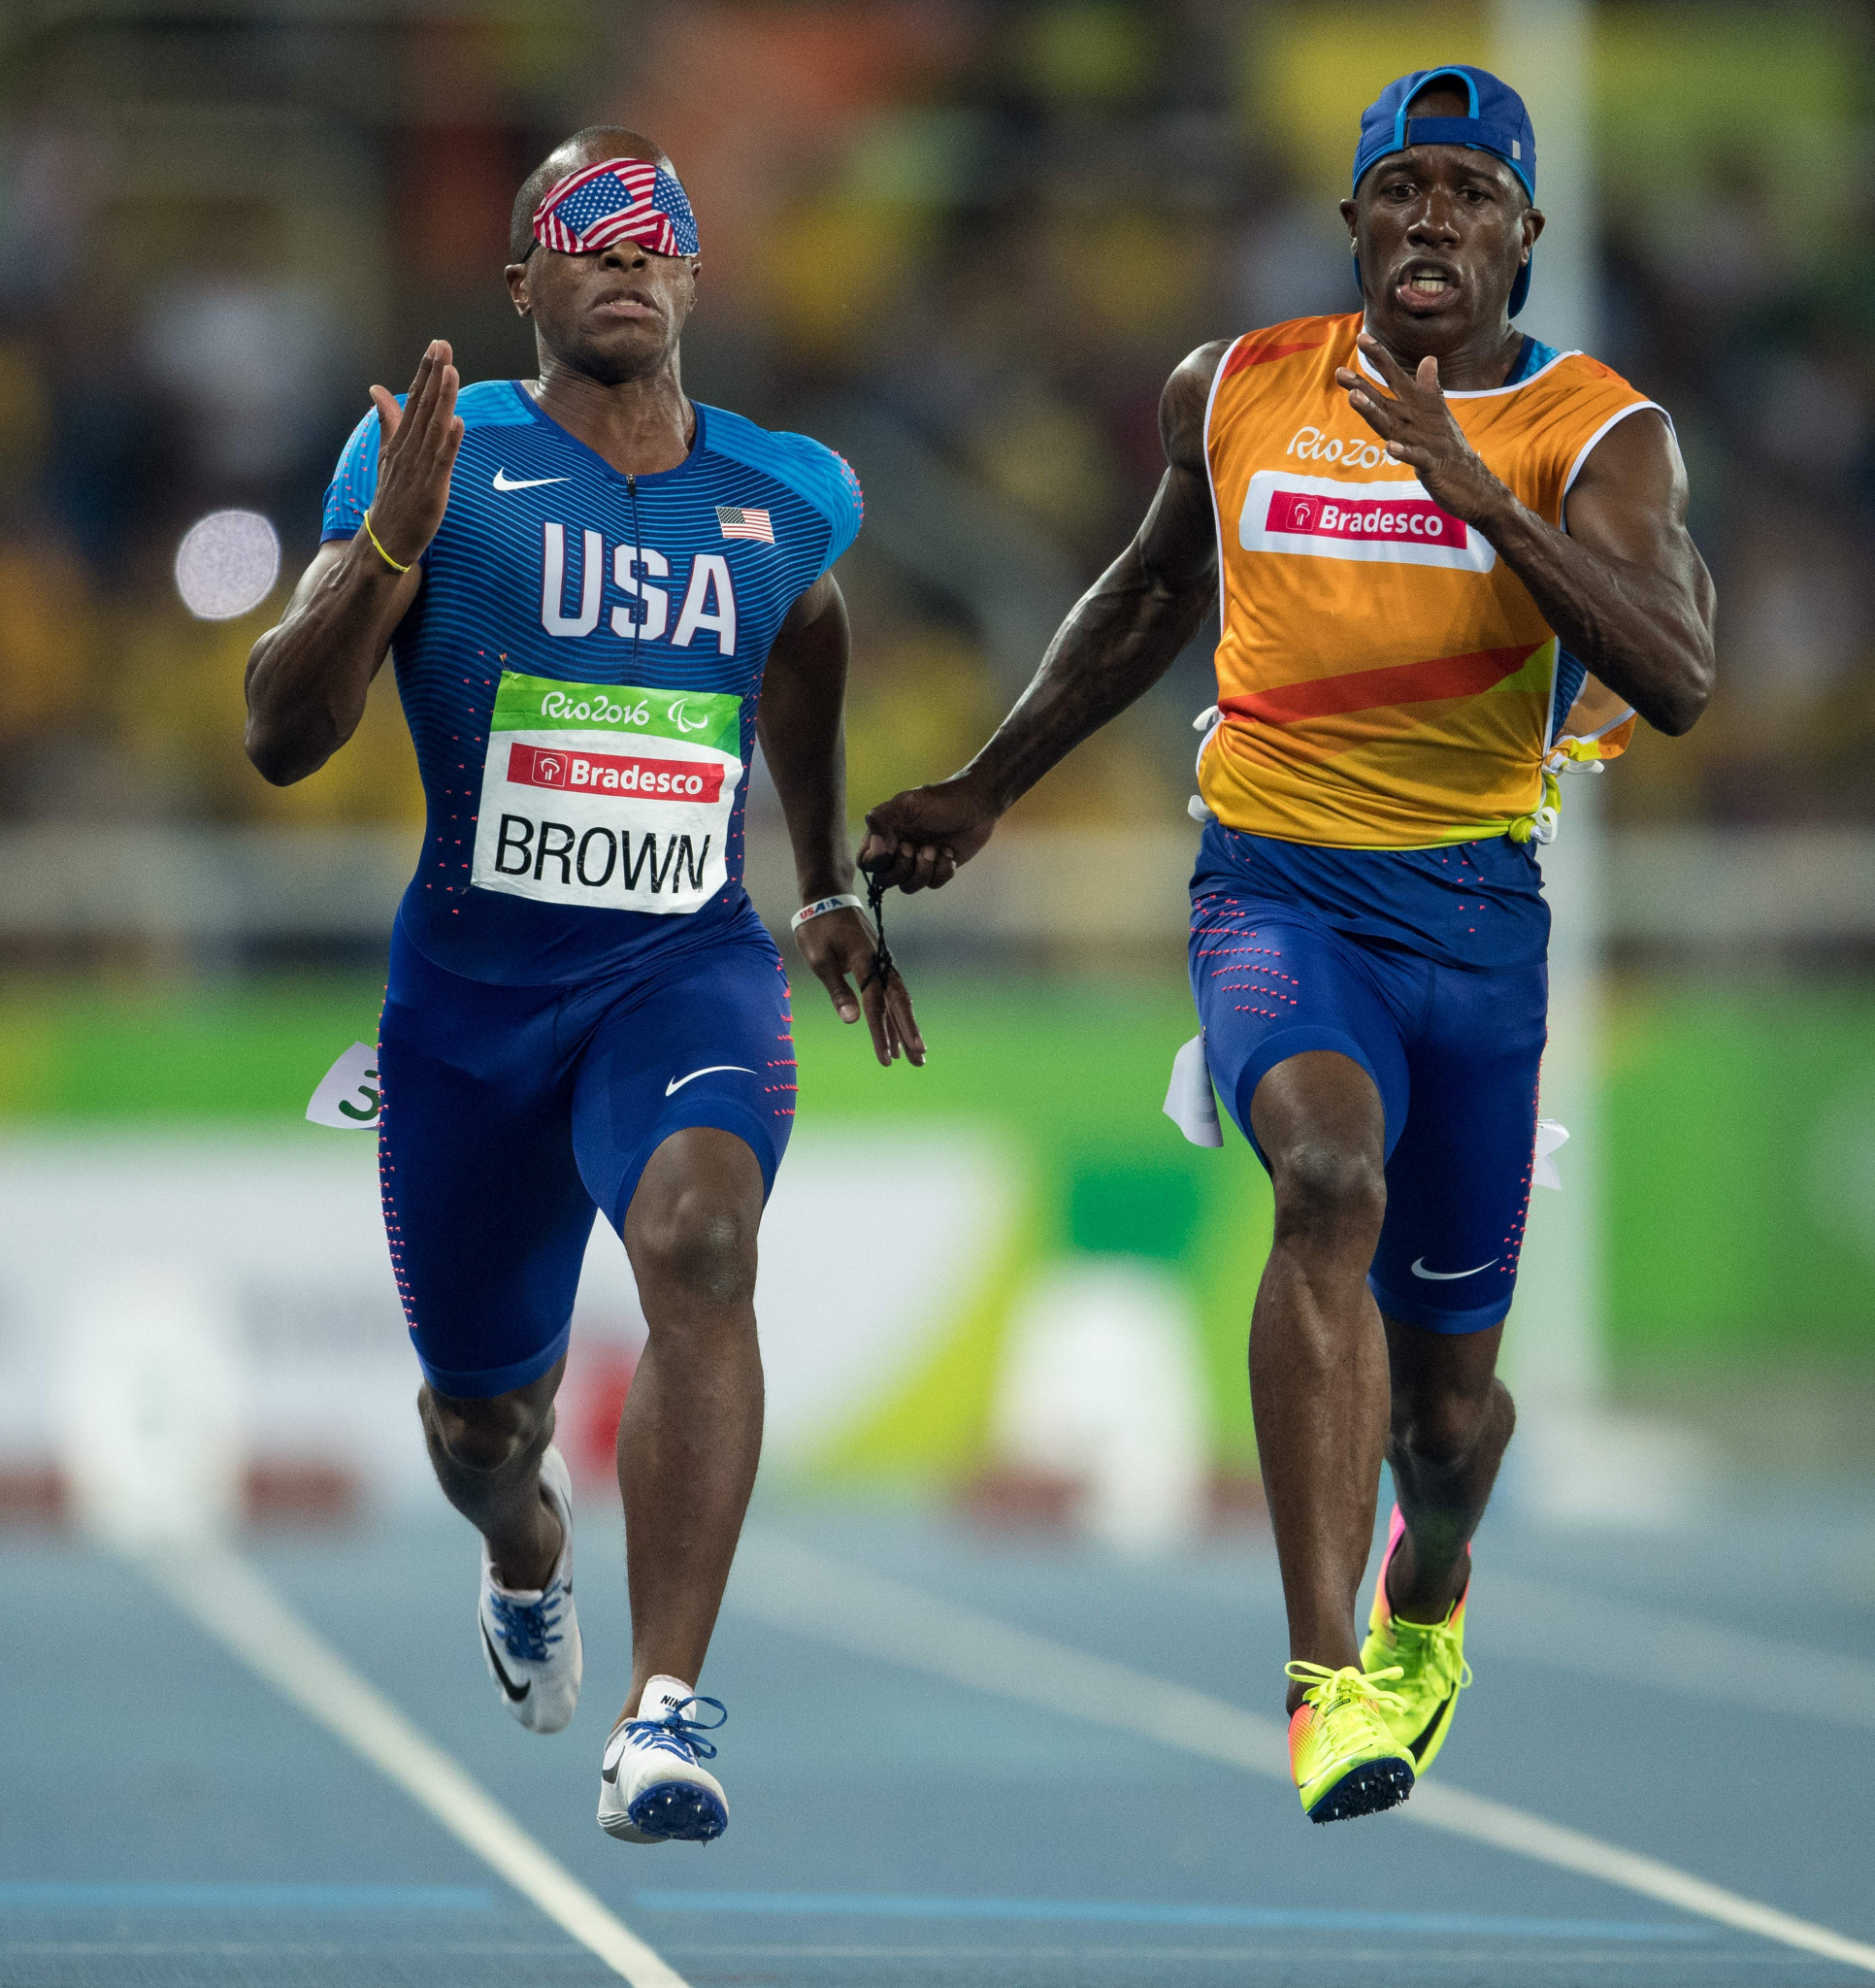 Brown leads American charge with 100m T11 victory at World Para Athletics Grand Prix